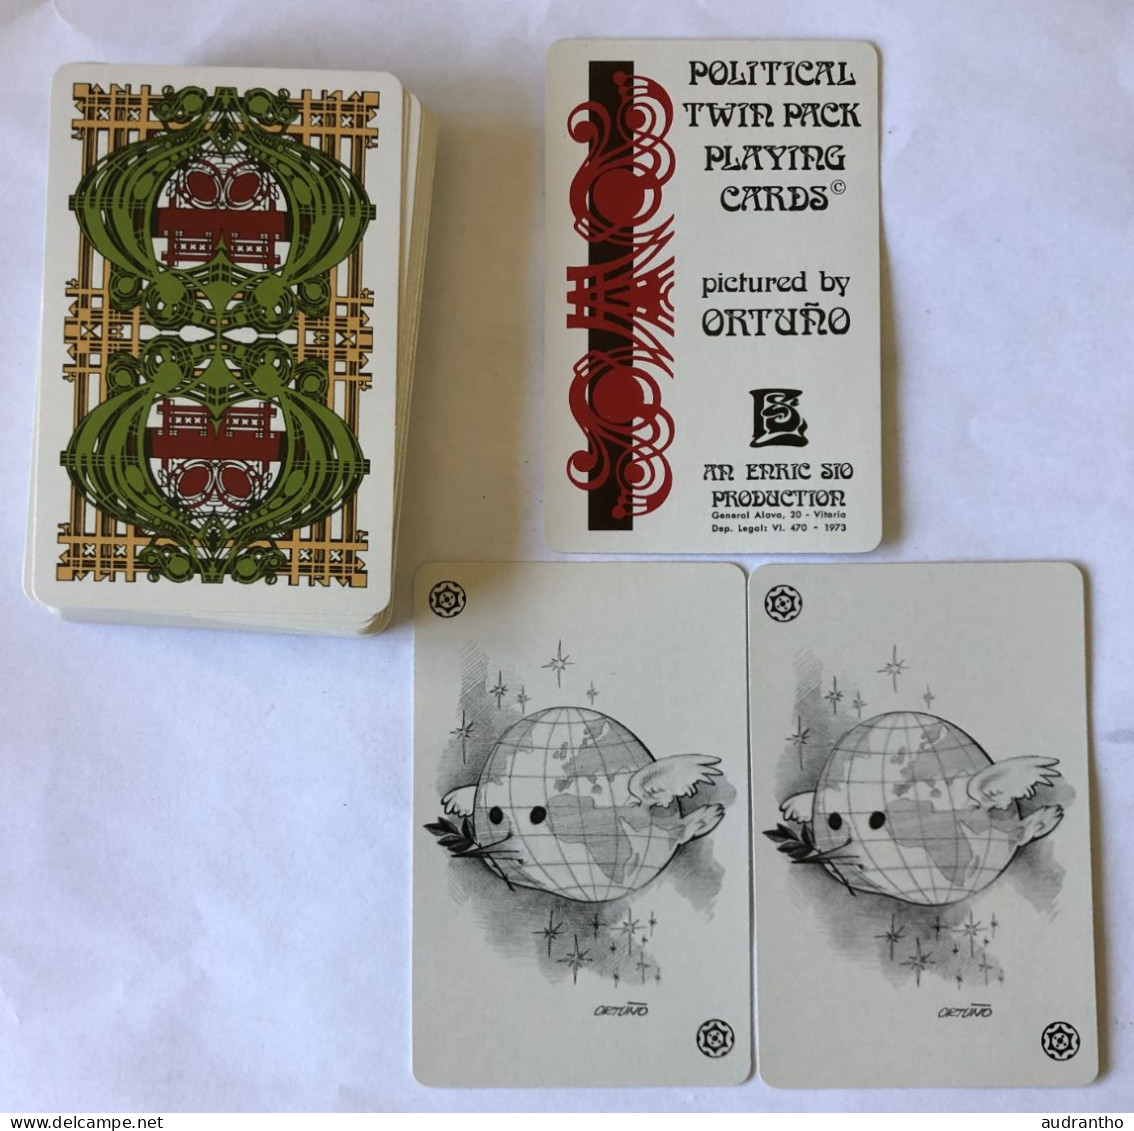 Très Beau Double Jeu 54 Cartes 1973 - Caricature Personnalité - Political Twin Pack Playing Cards By ORTUNO - Erric Sio - 54 Cartas